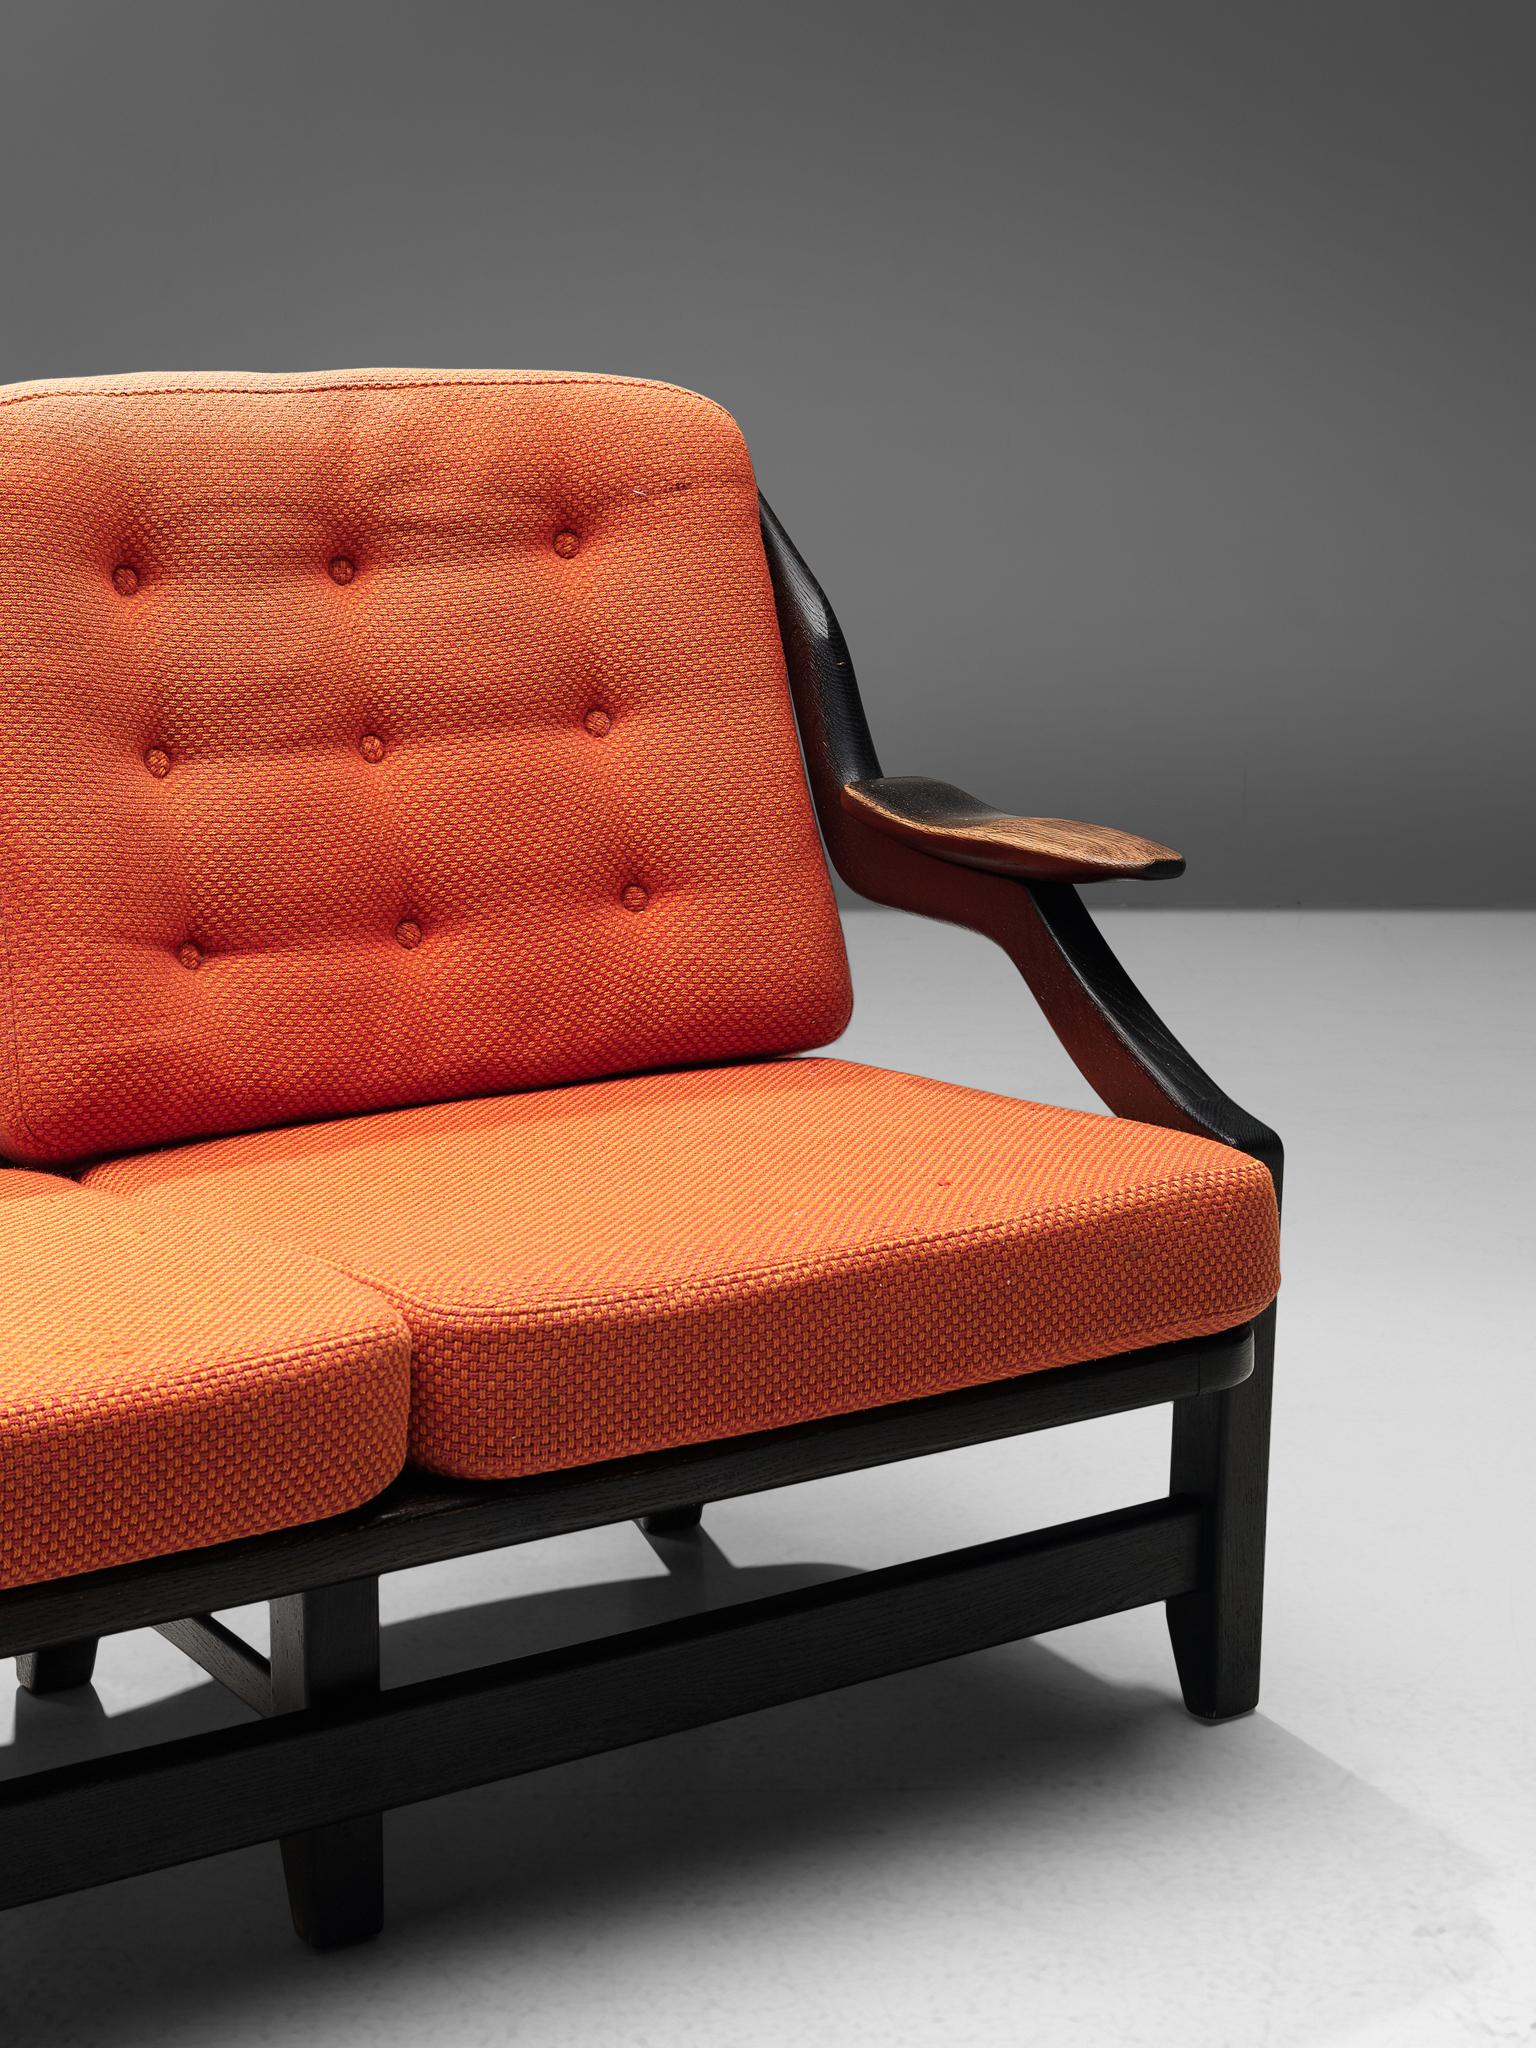 Guillerme & Chambron Sofa with Orange Upholstery 2